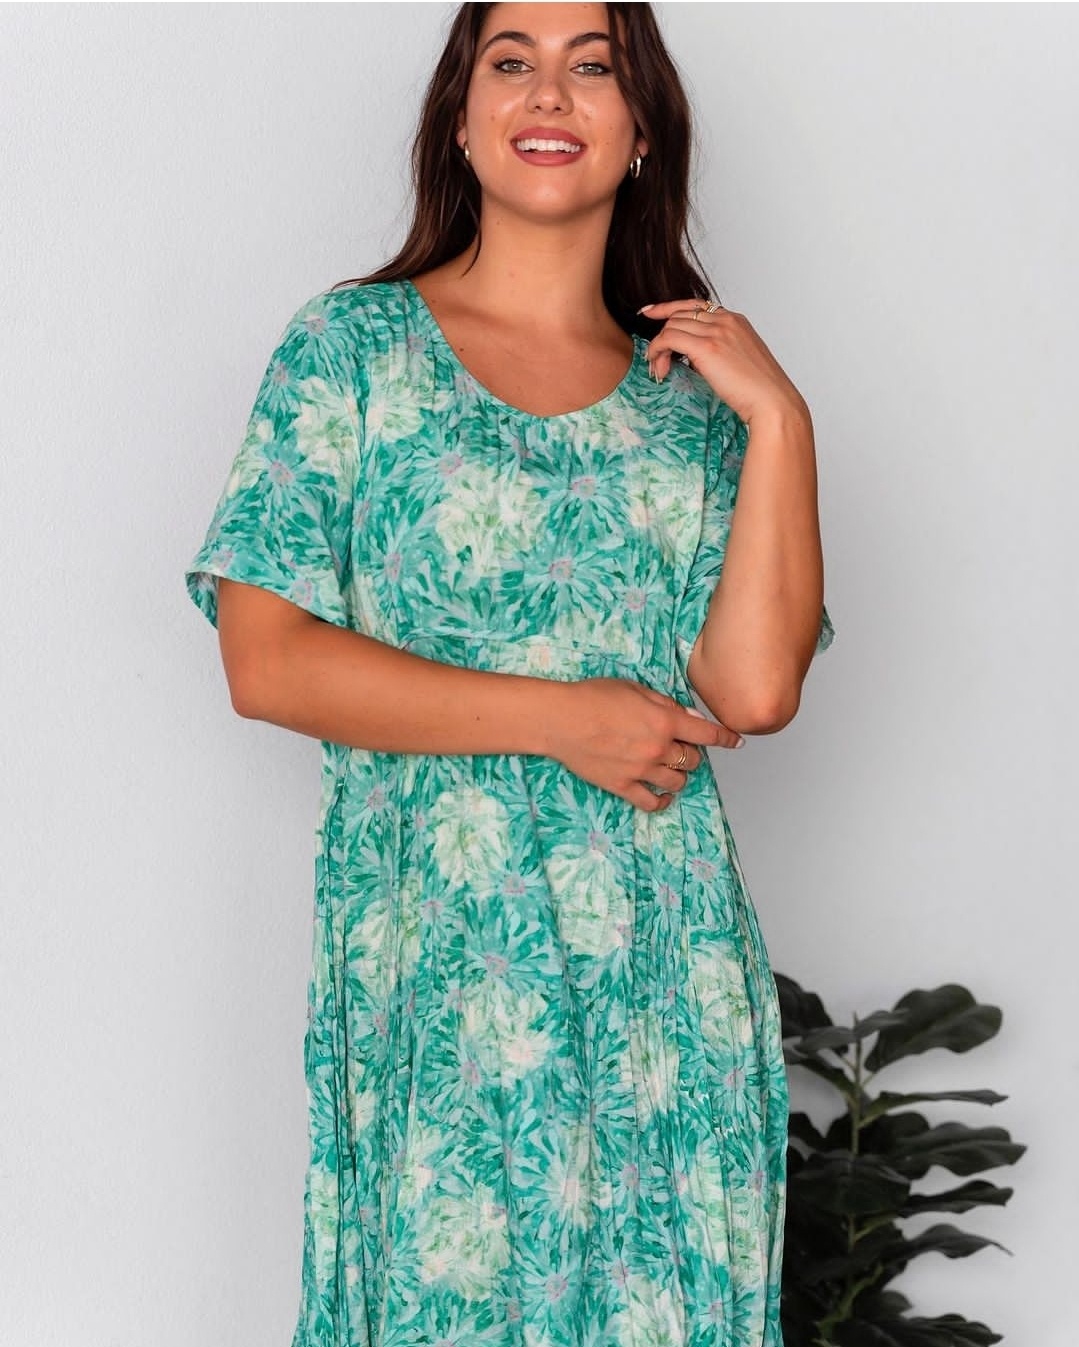 Willow Tree Beck Floral Panelled Dress